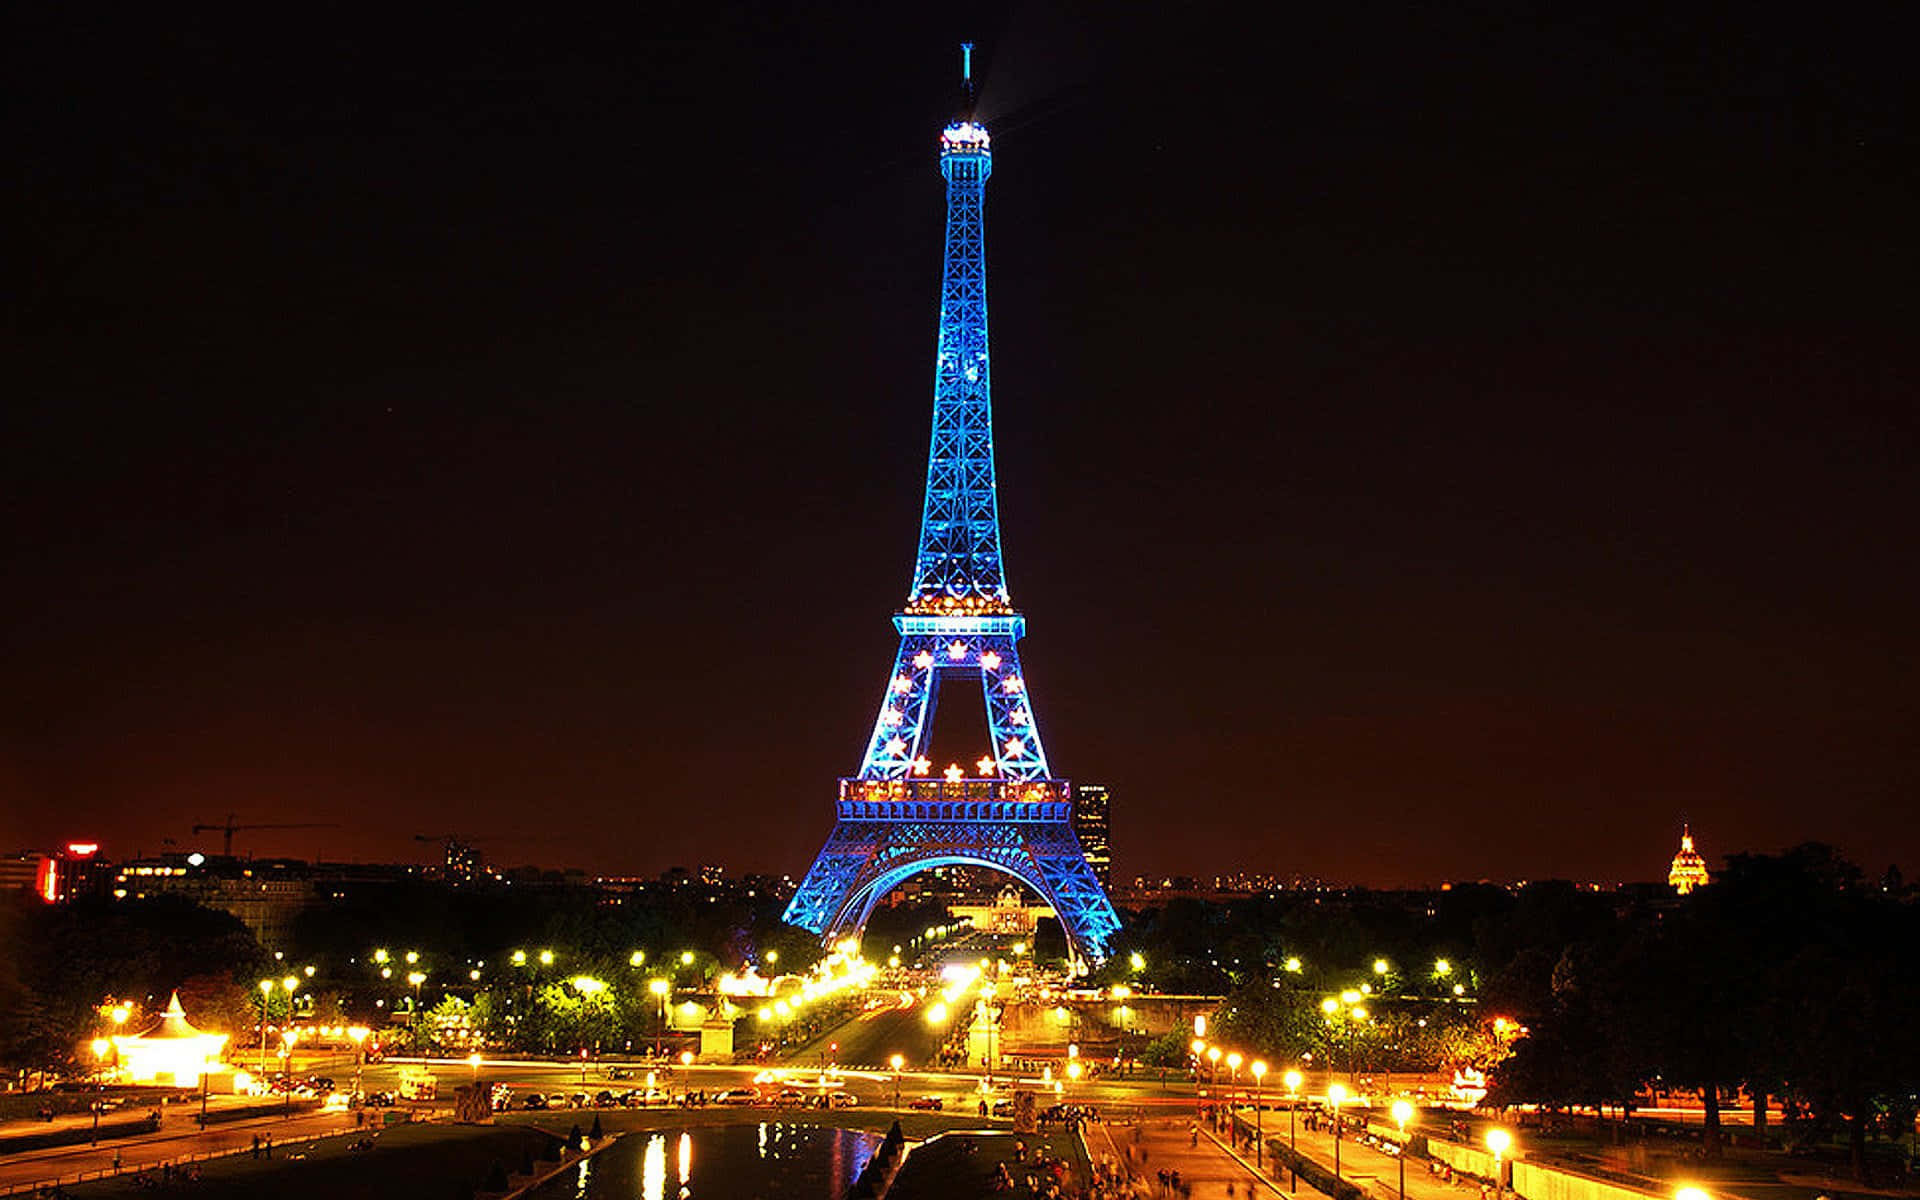 The Eiffel Tower in Paris shines brilliantly at night